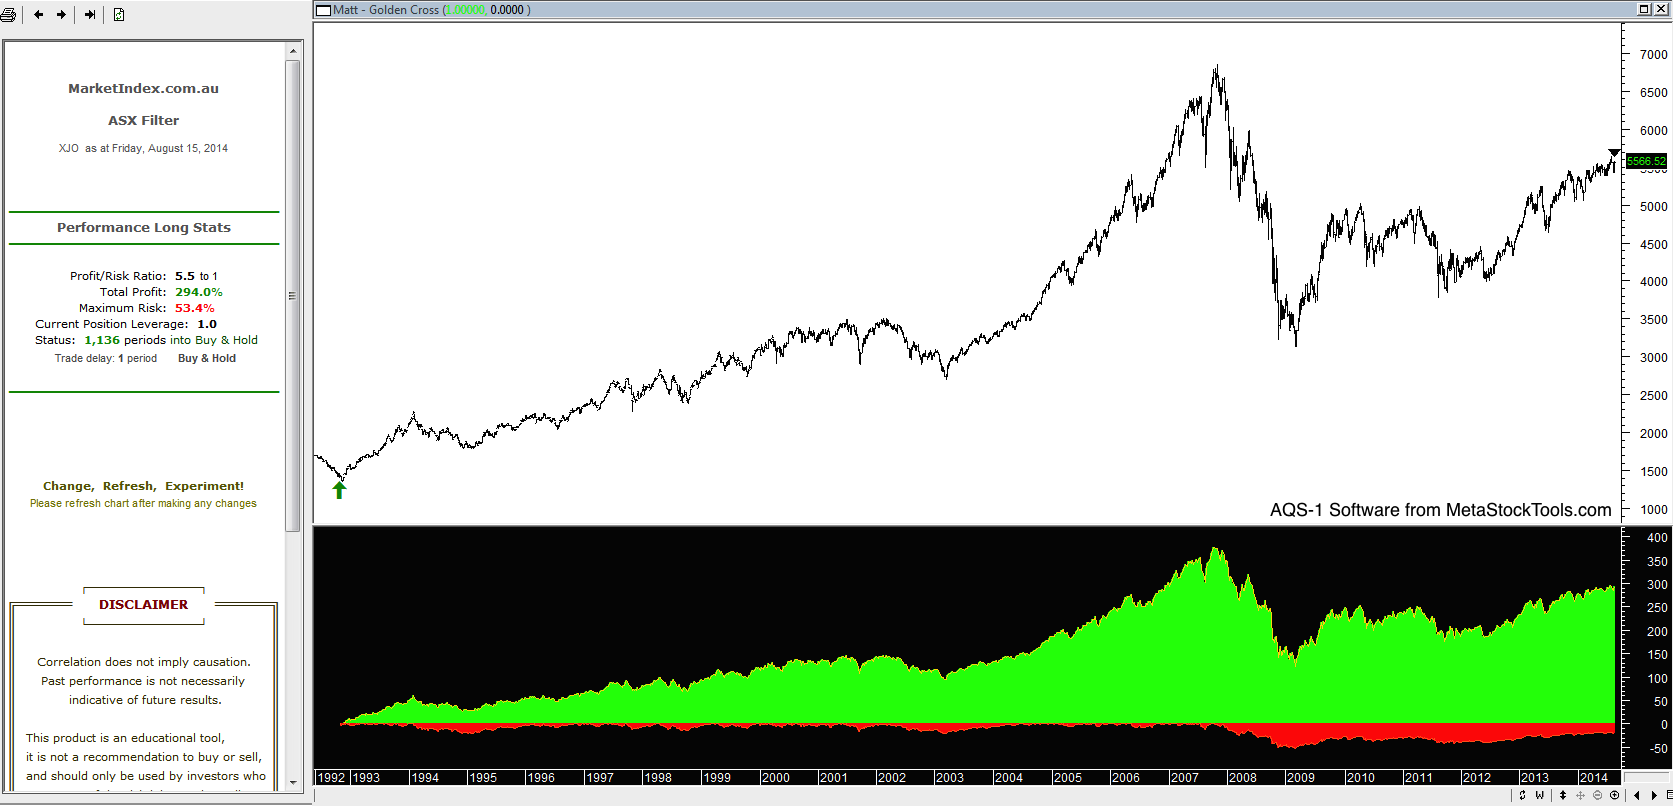 Buy & Hold Strategy on the ASX since 1992